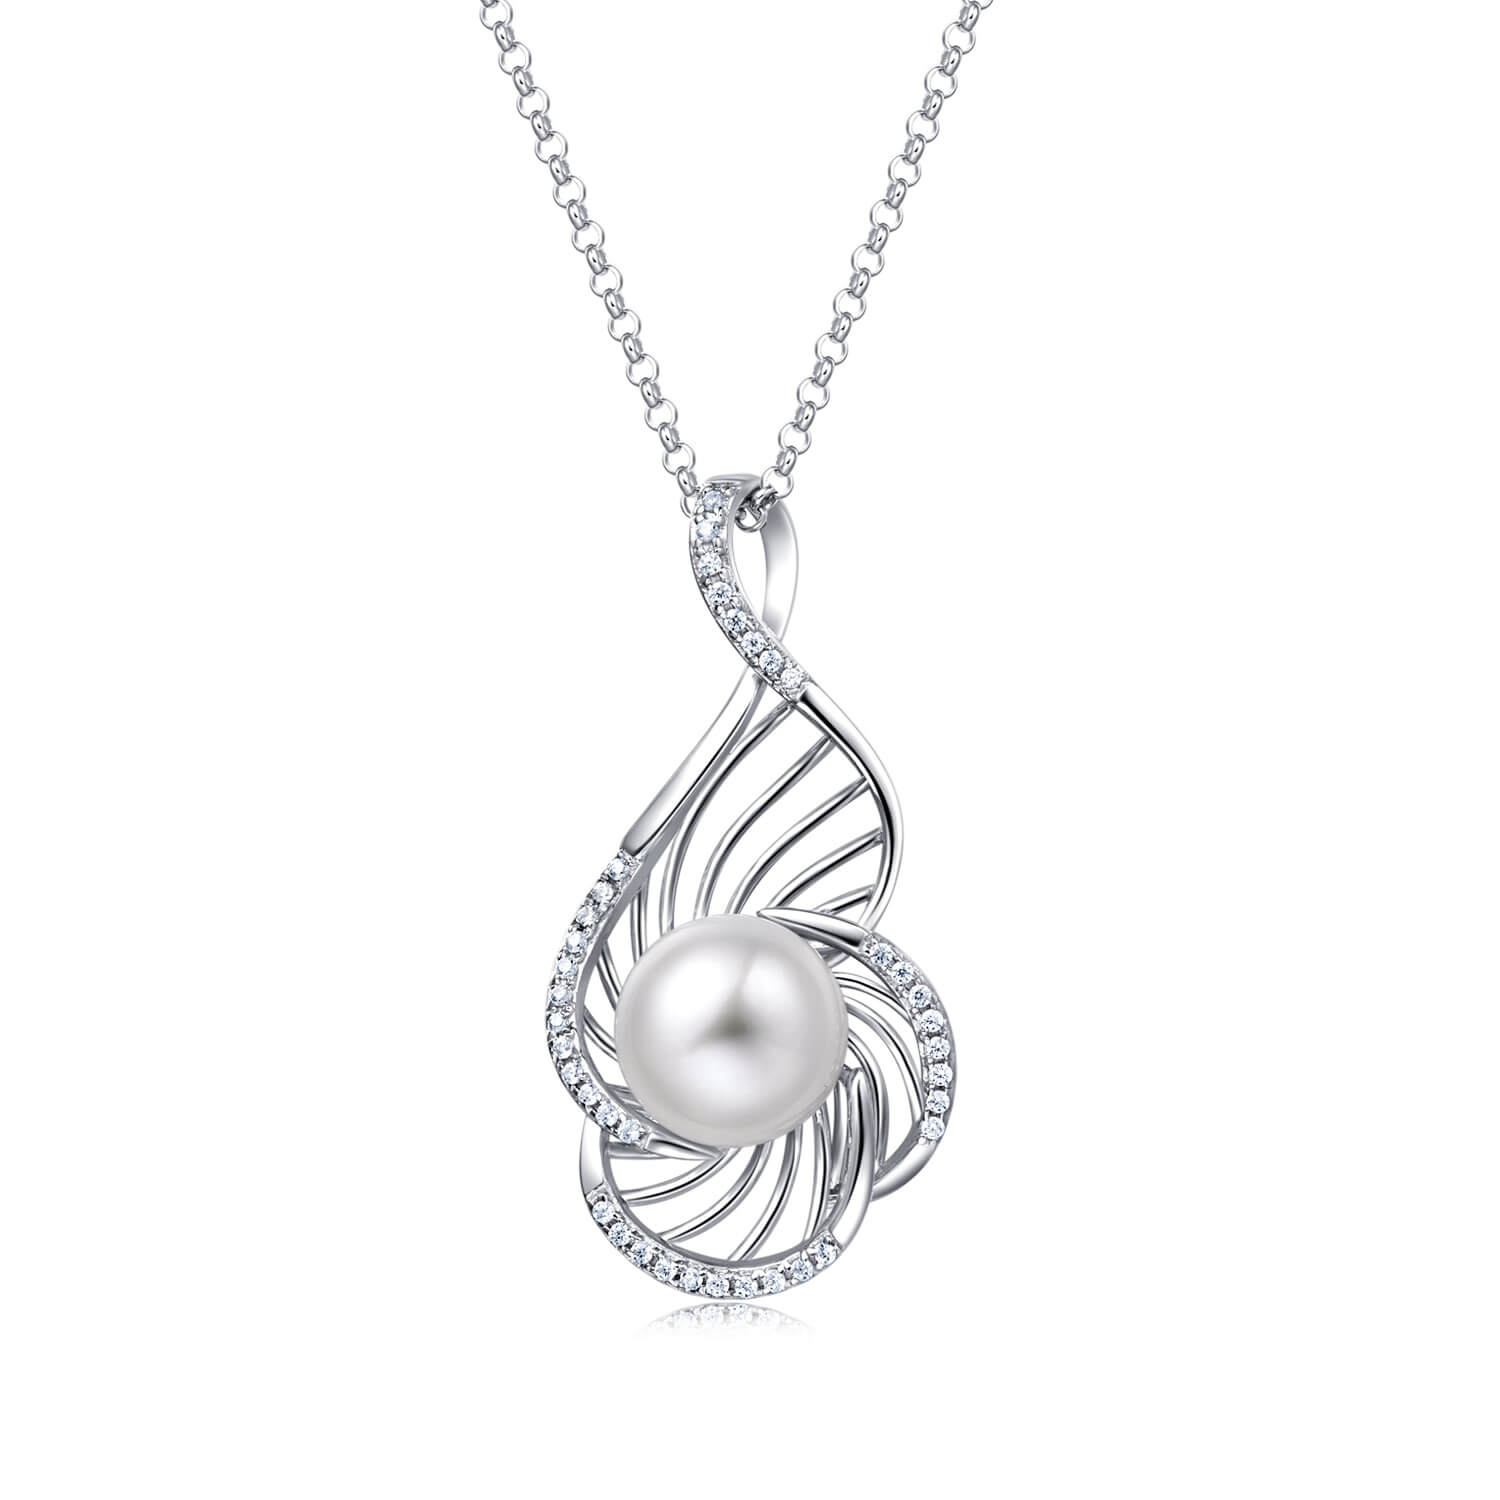 Molah 925 Silver Cultured Freshwater Pearl and Cubic Zirconia Swirl Pendant Necklace for Women